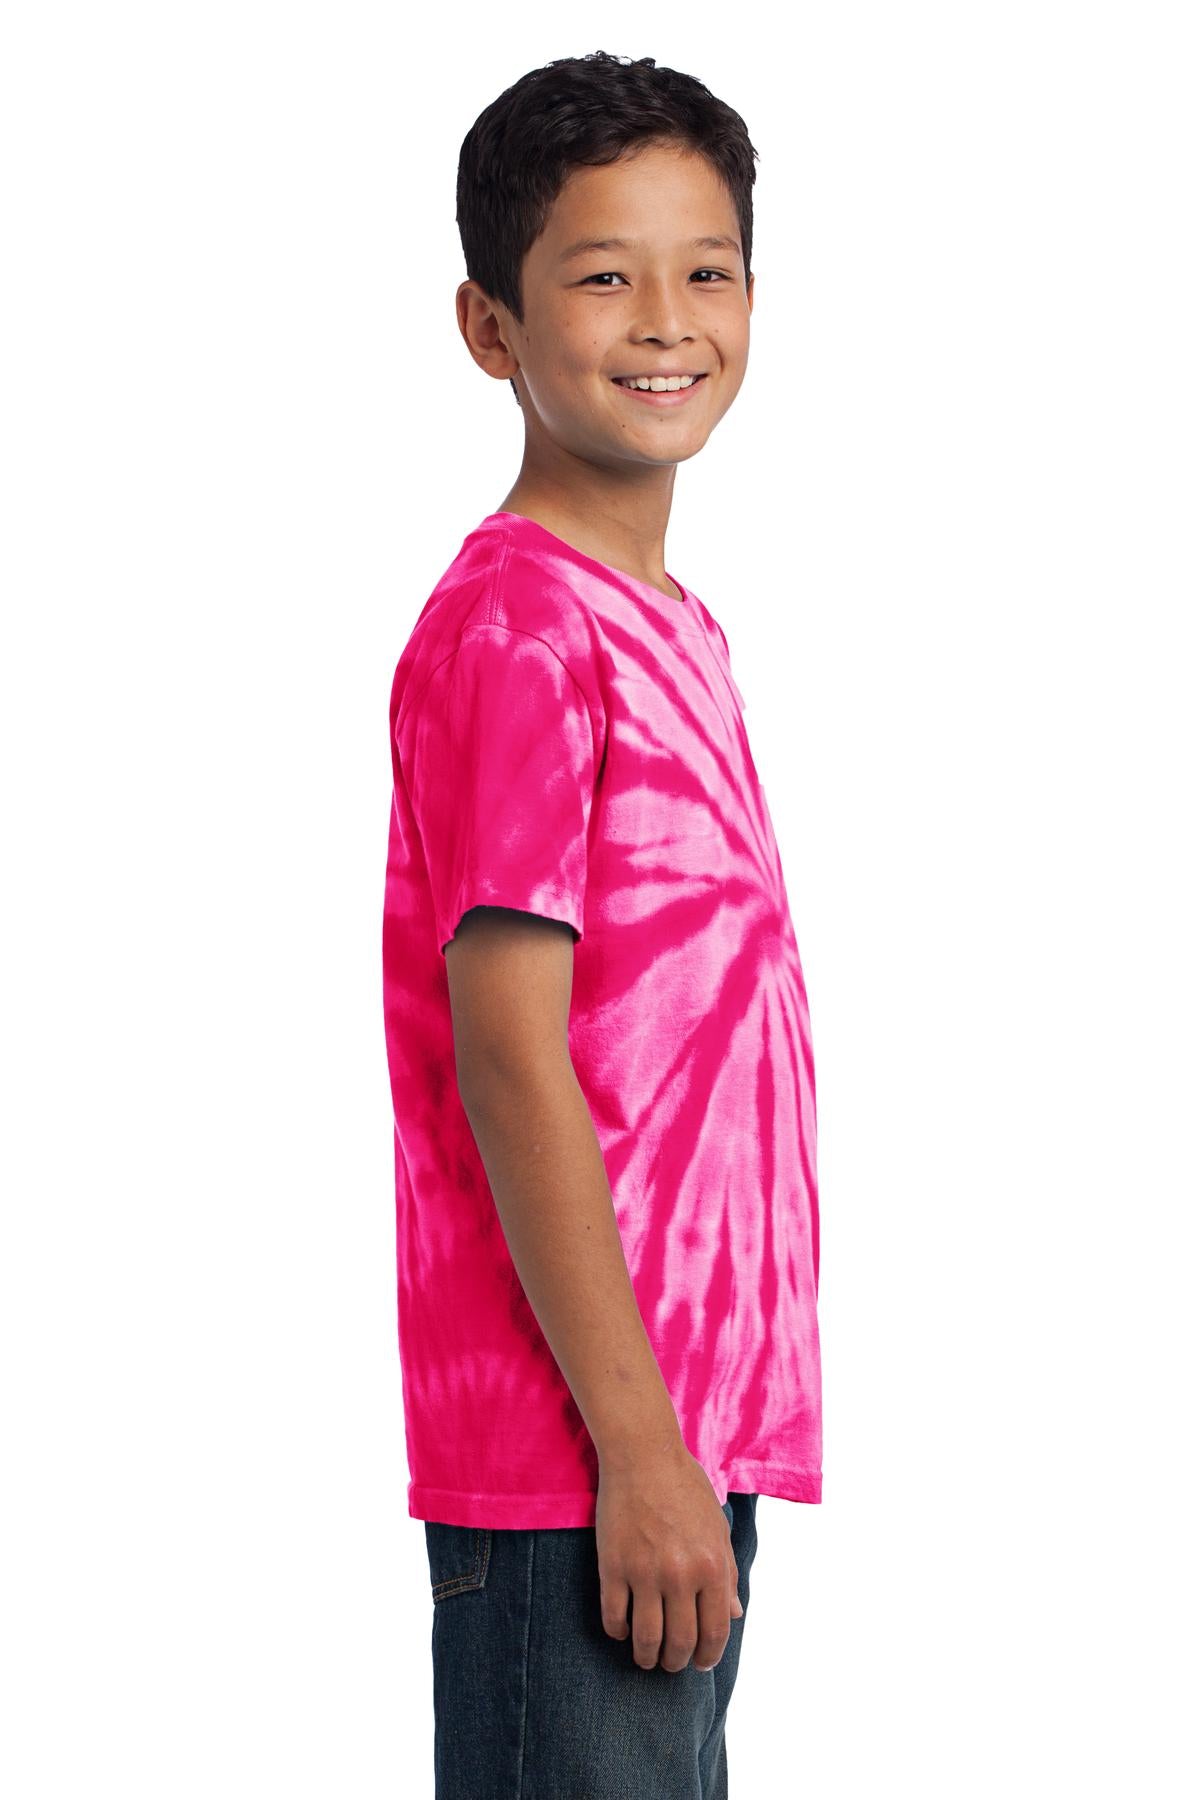 Port & Company - Youth Tie-Dye Tee. PC147Y - Pink